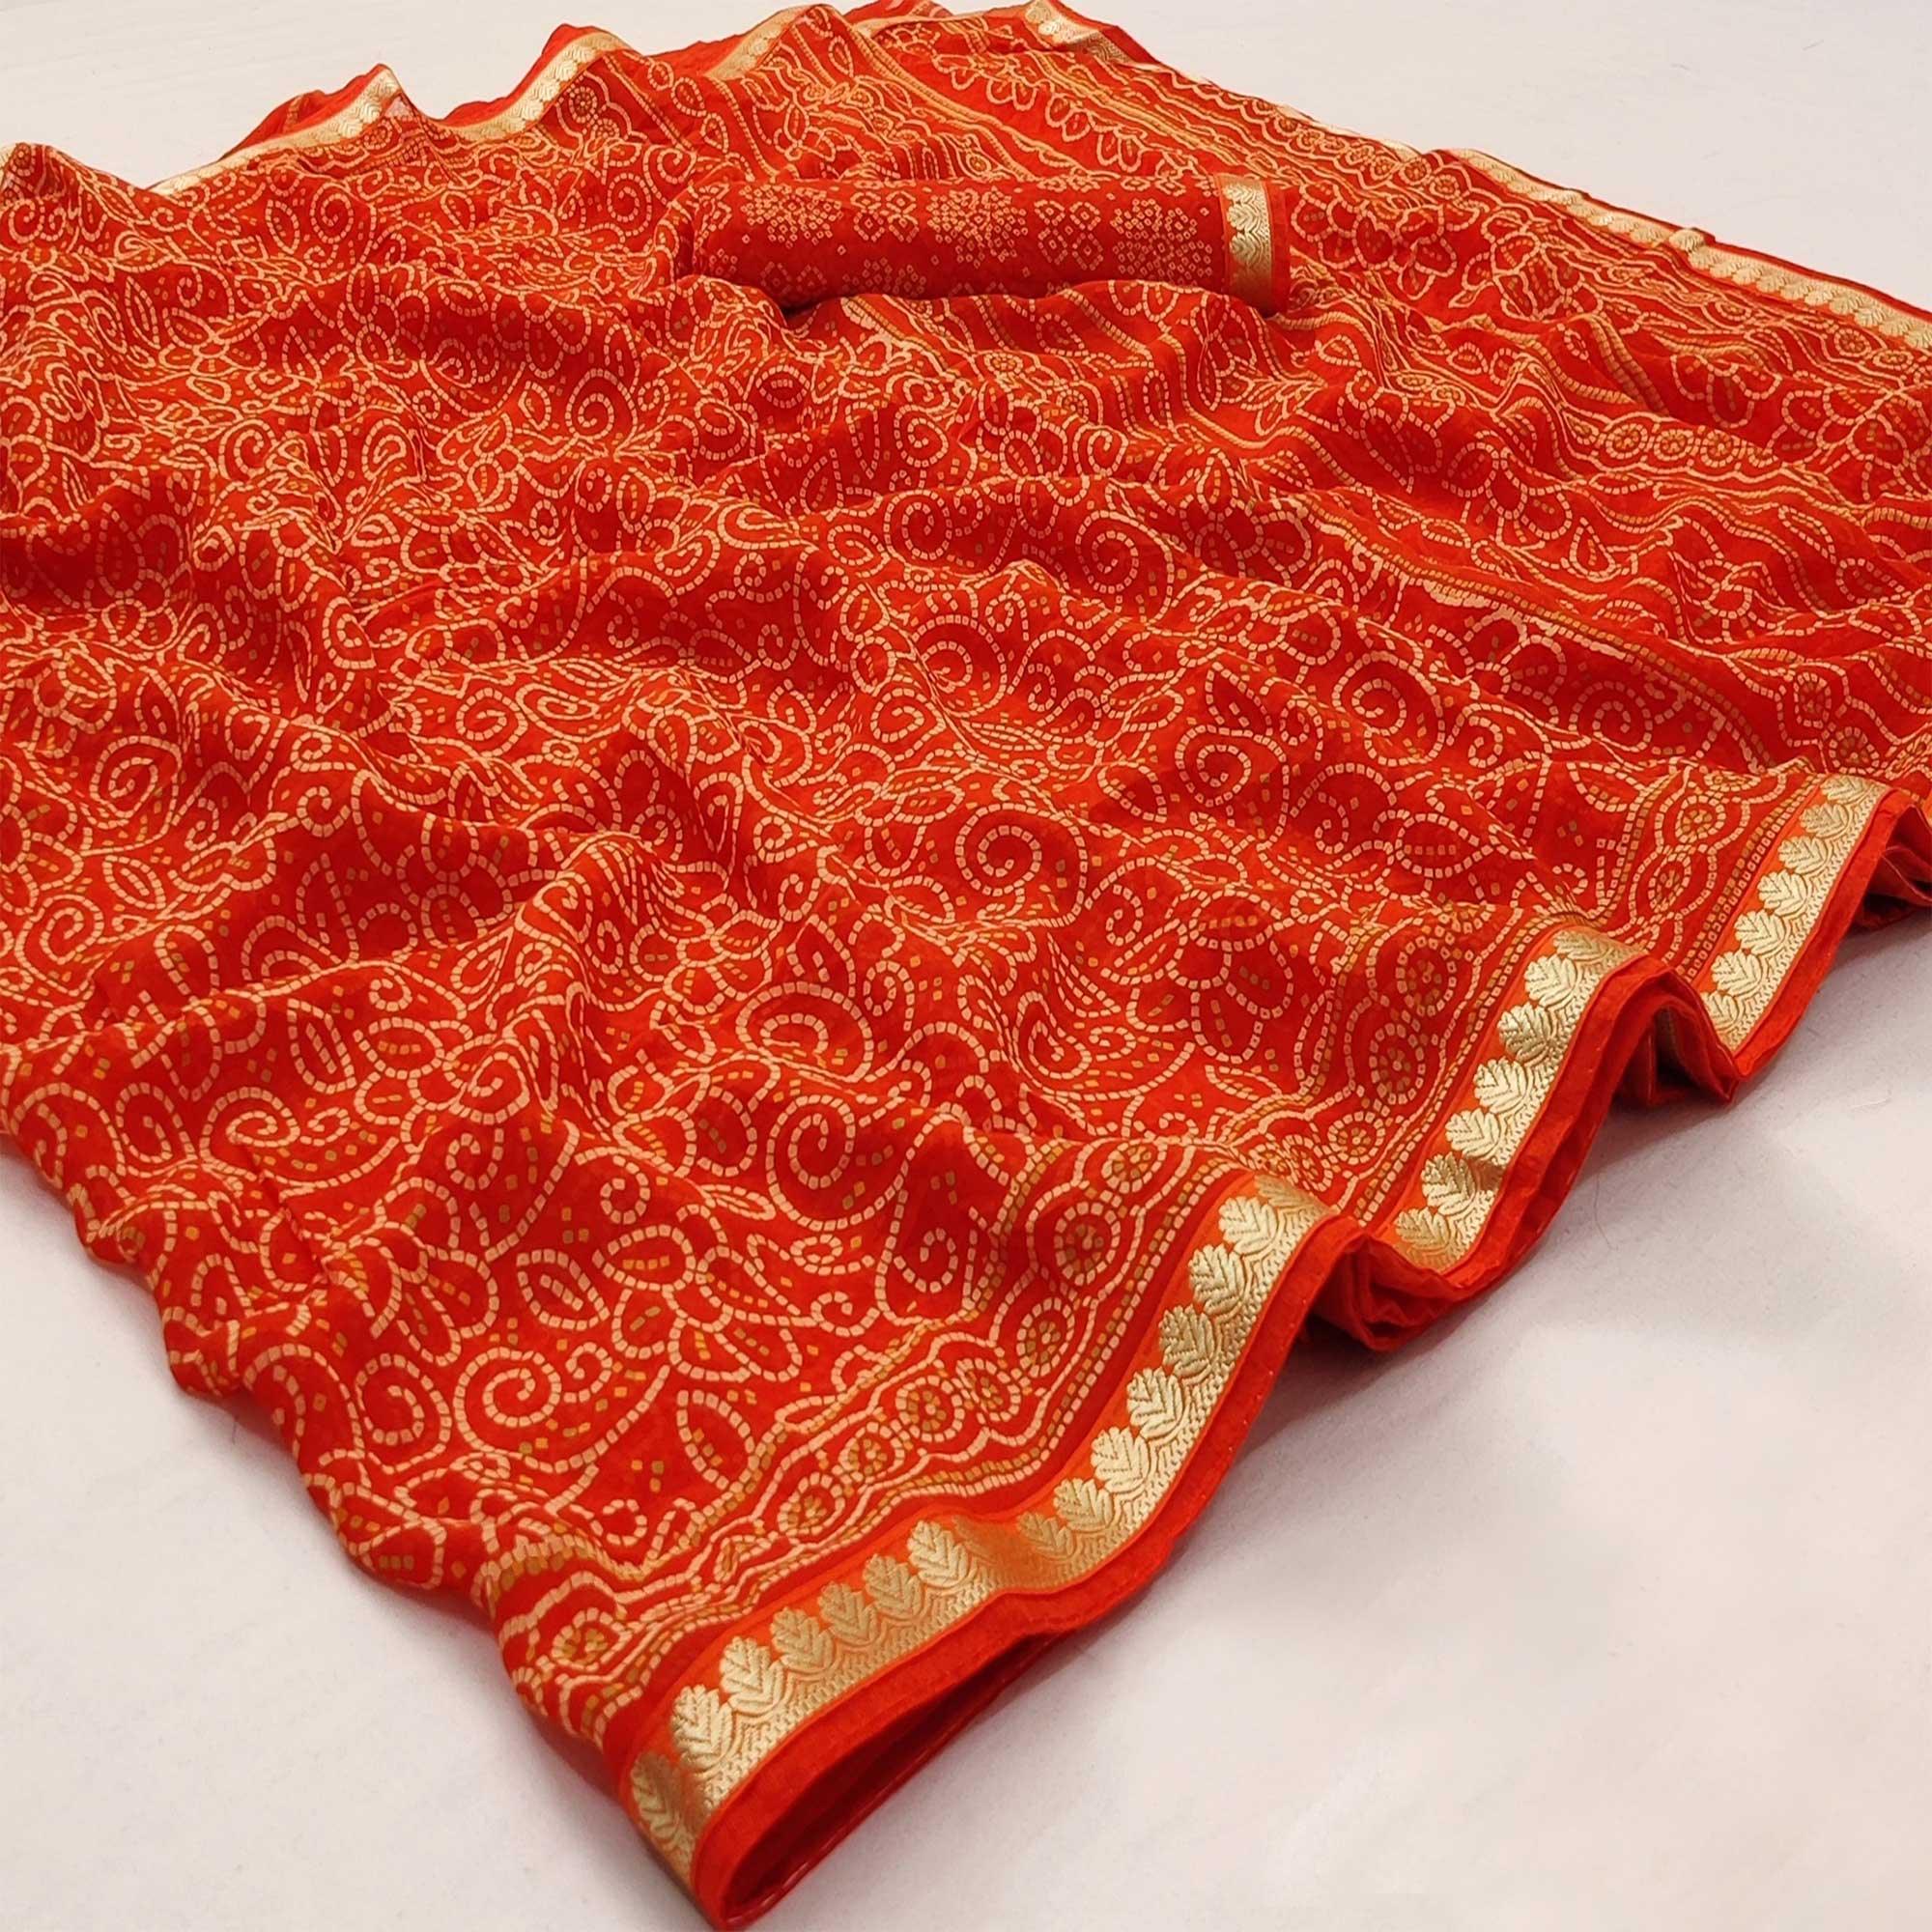 Orange Casual Wear Bandhani Printed Soft Georgette Saree With Fancy Border - Peachmode